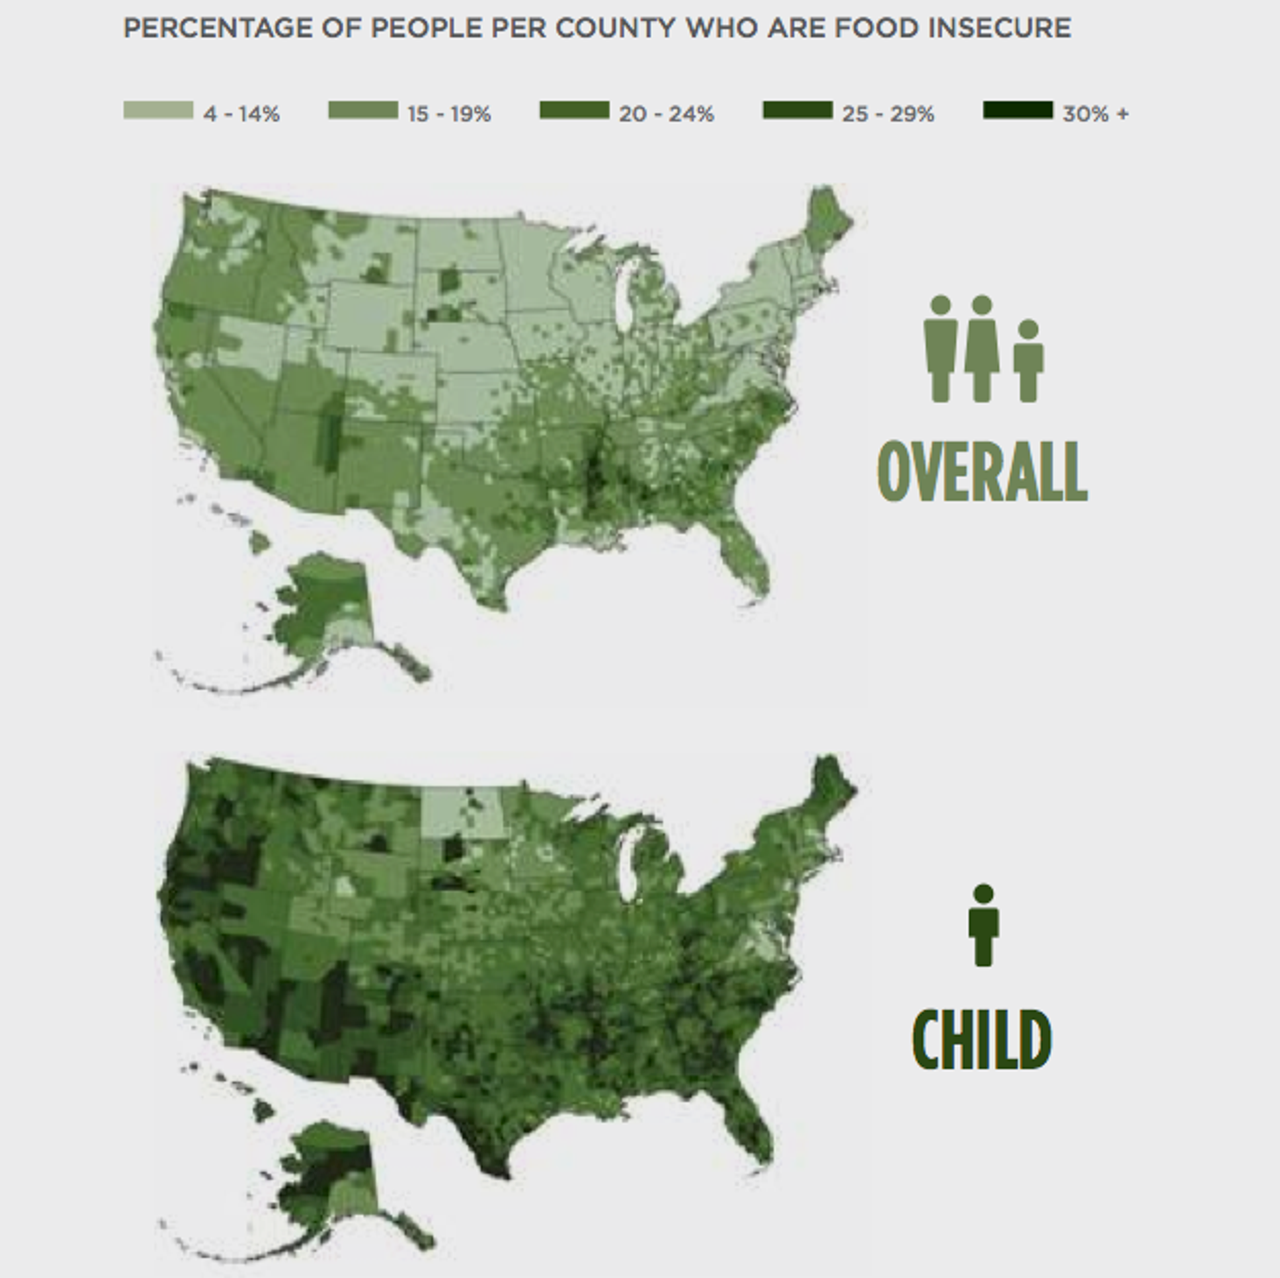 Food insecurity in the USA